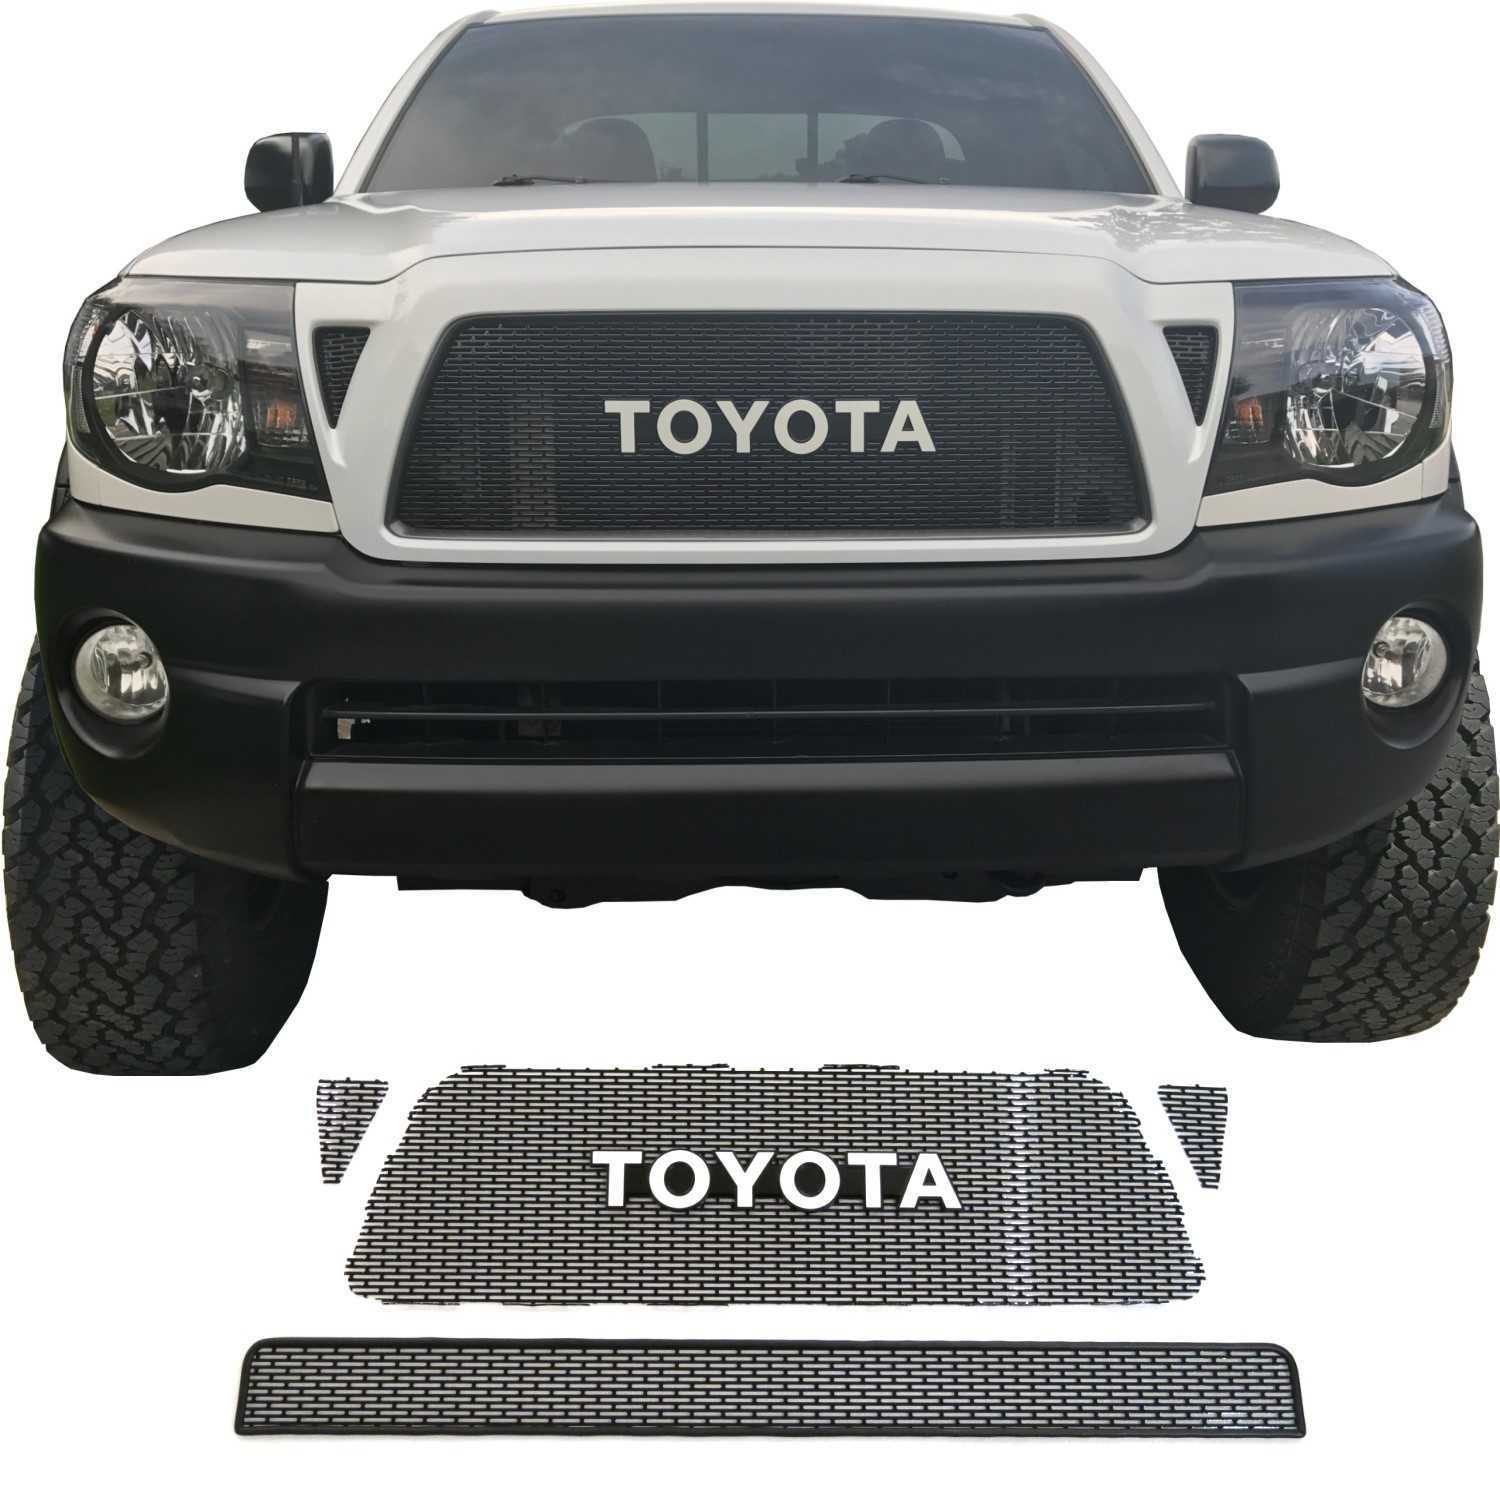 2005 - 2011 Toyota Tacoma Mesh Grill With Toyota Emblem